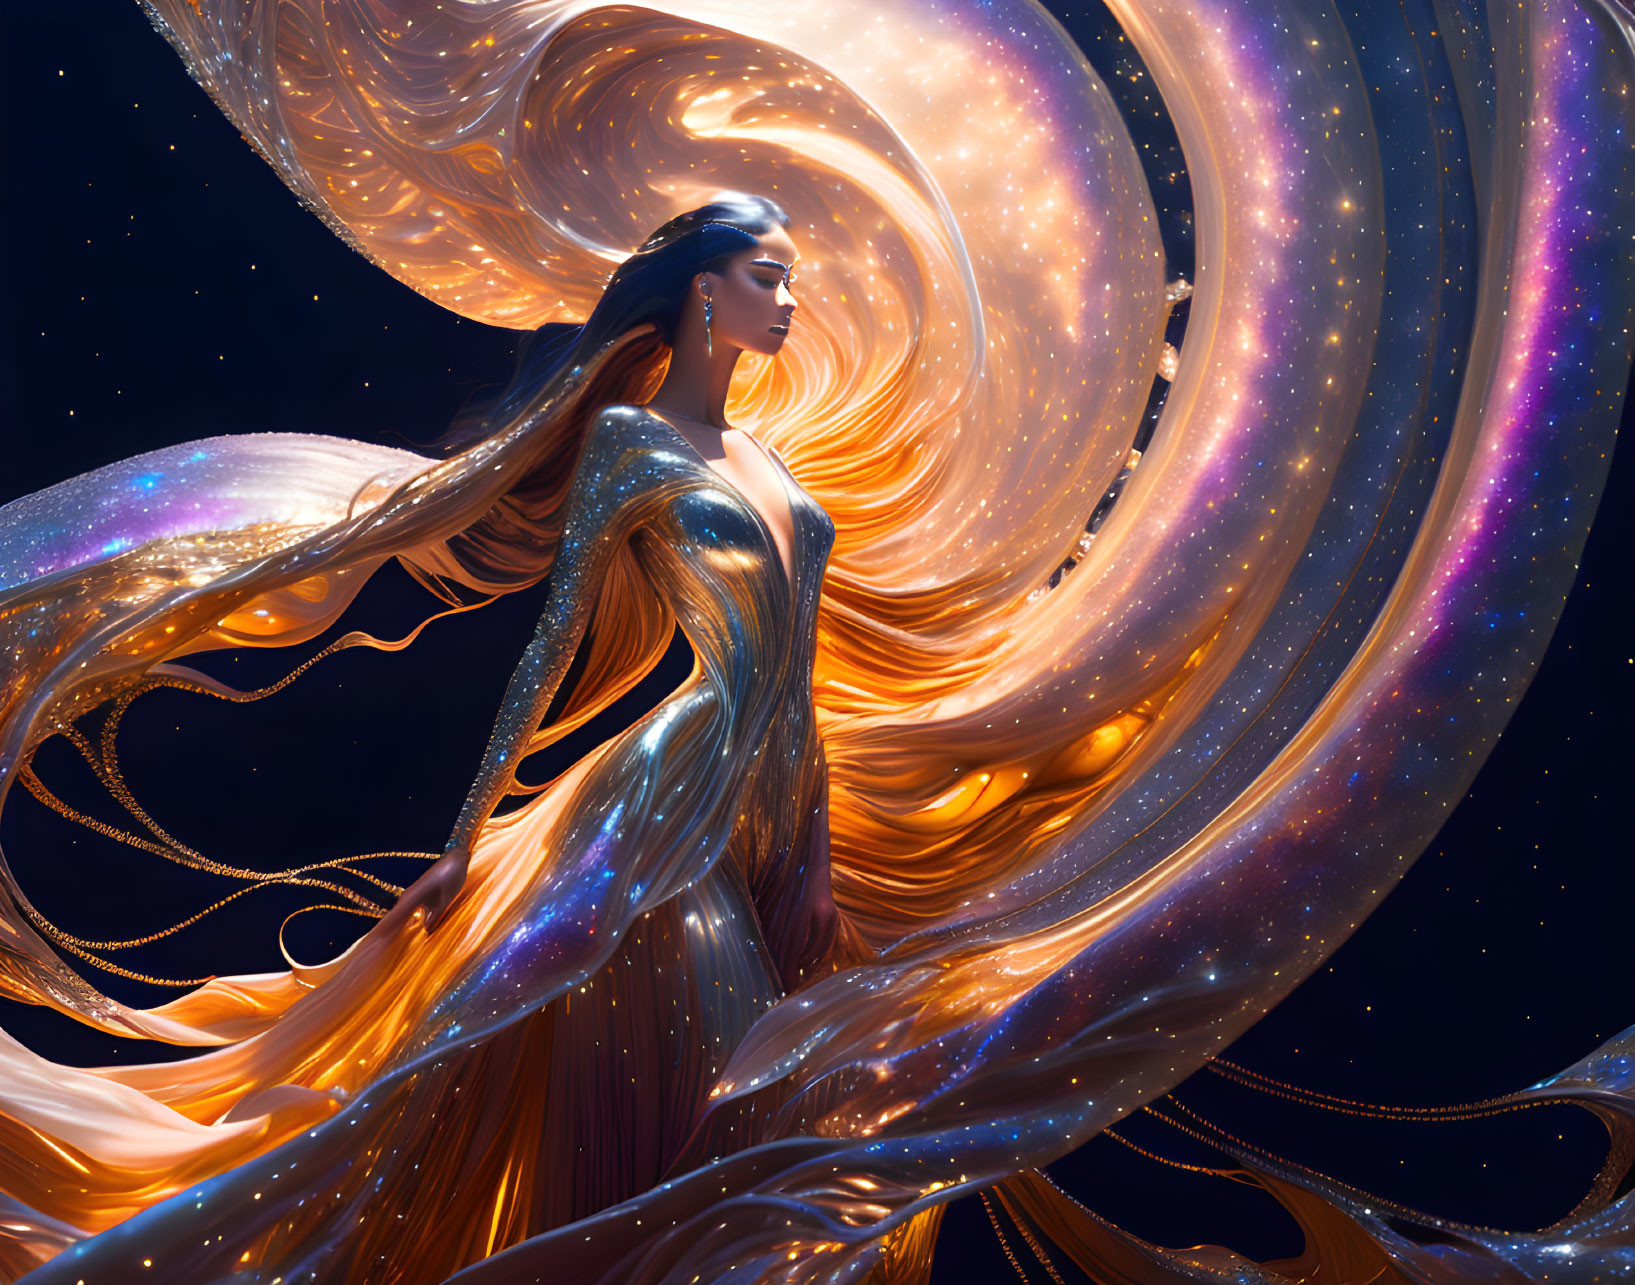 Majestic woman in golden garments merges with cosmic galaxy